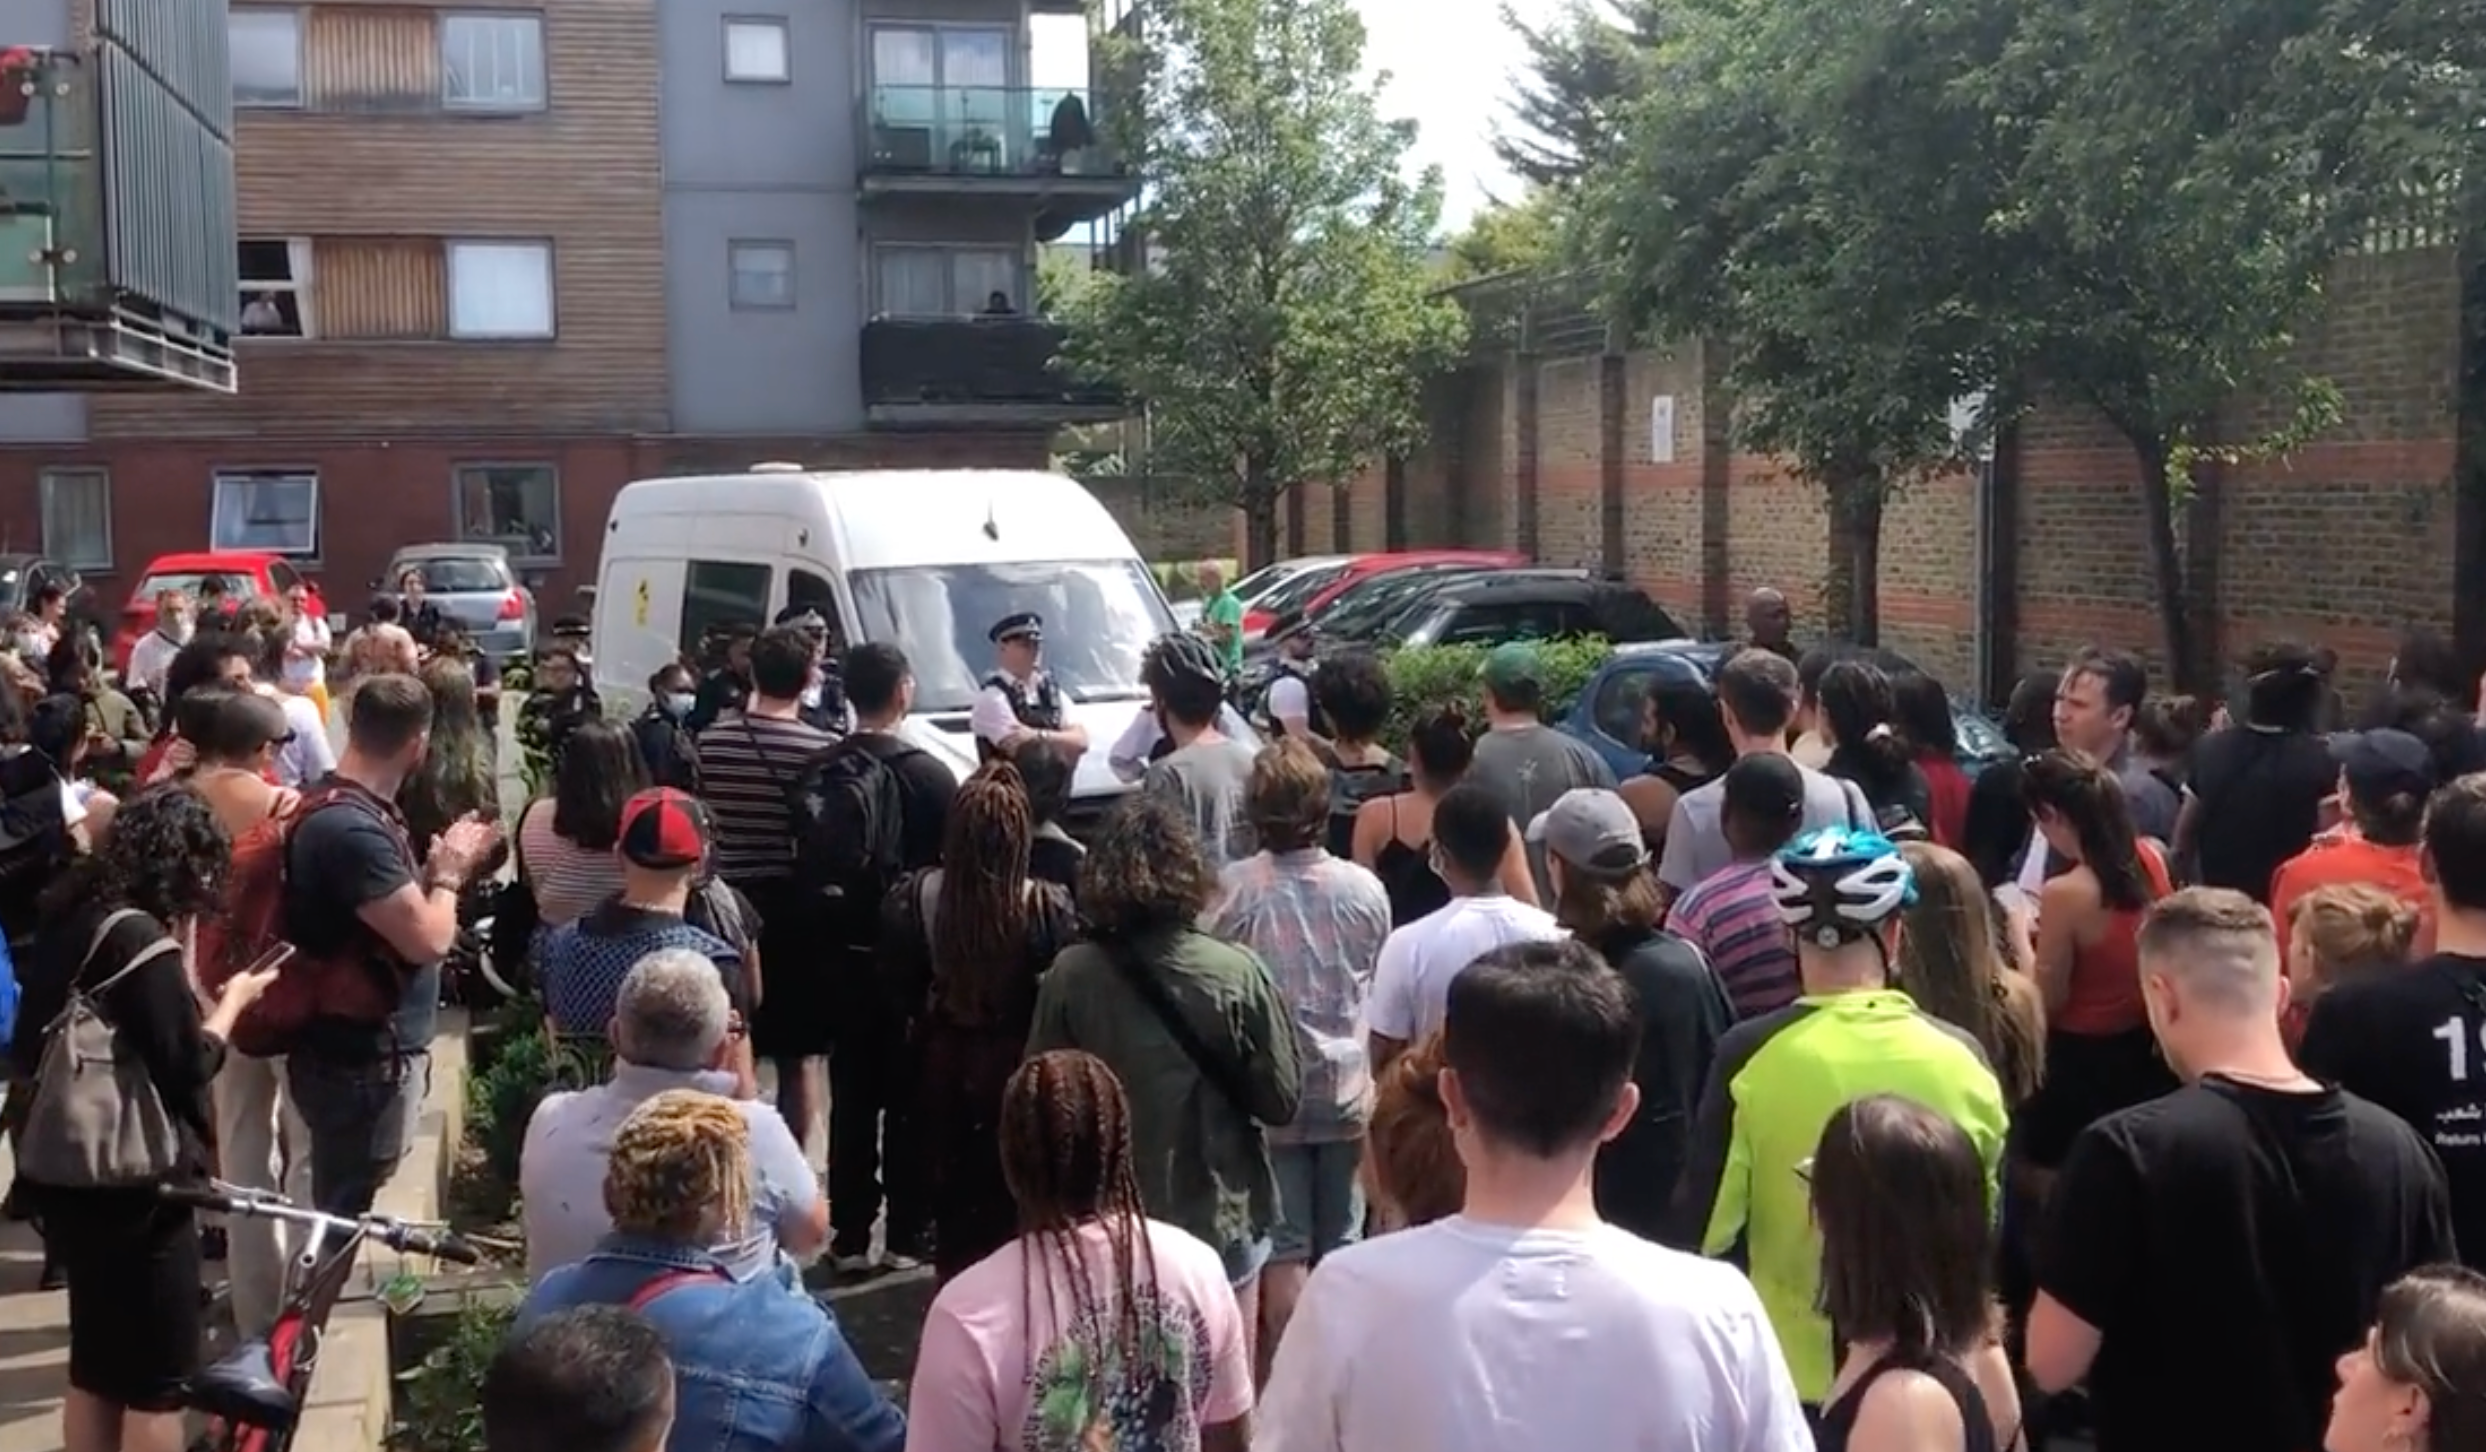 Protesters gathered to stop a van leaving Peckham containing a man arrested on suspicion of immigration offences